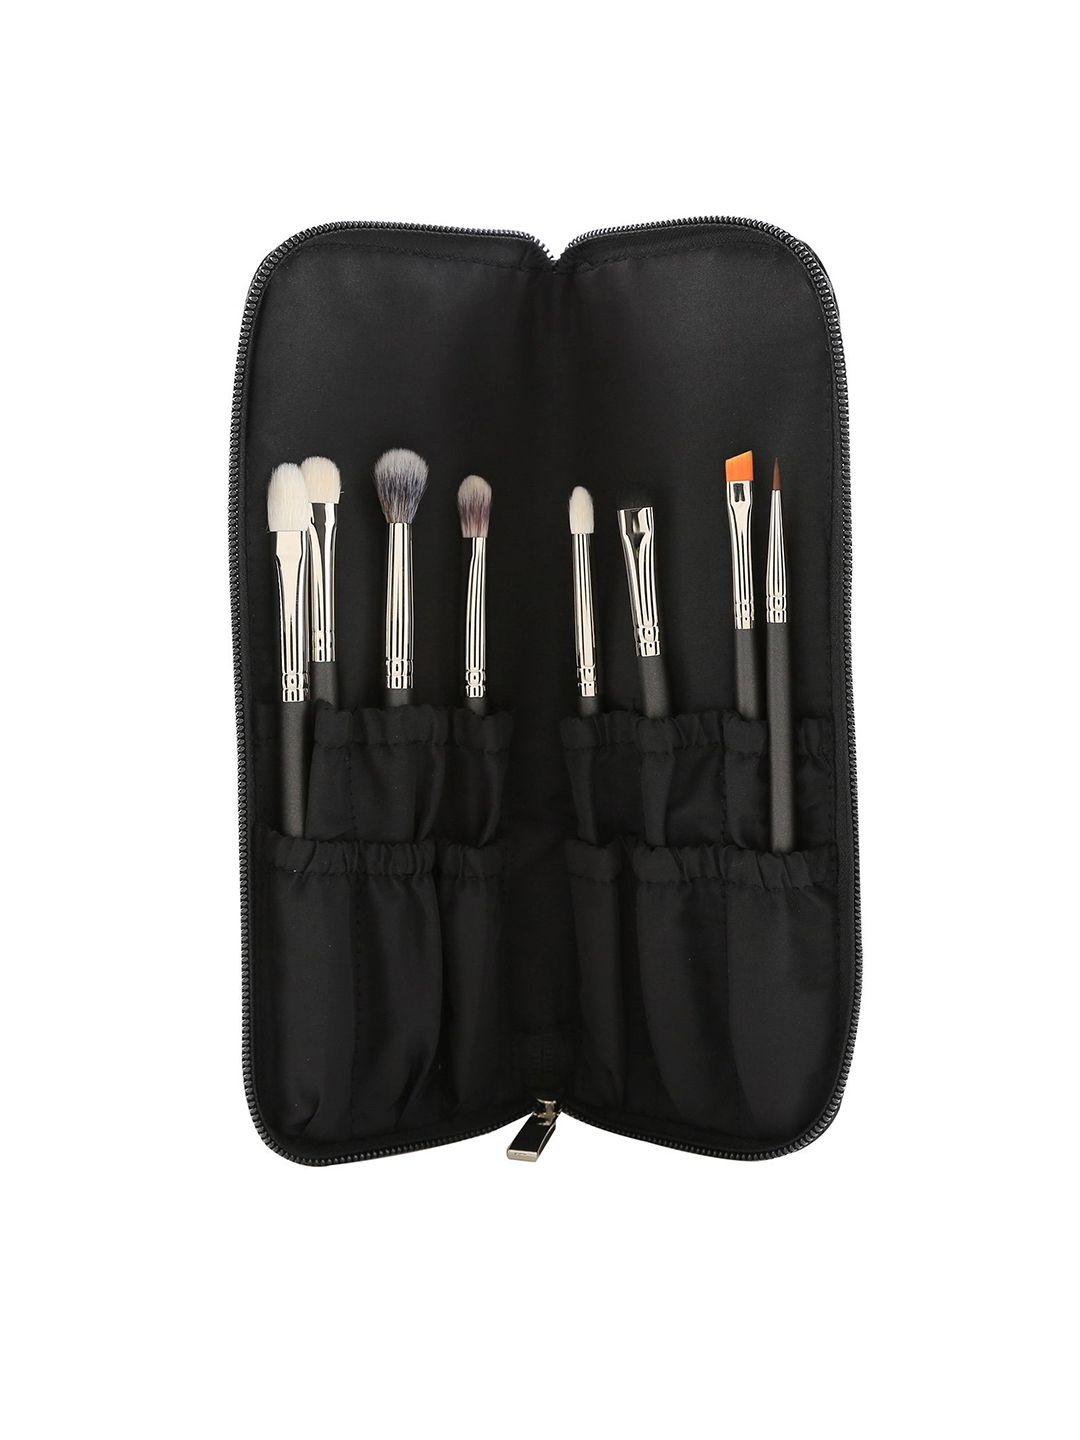 pac unisex pack of 8 brush face series